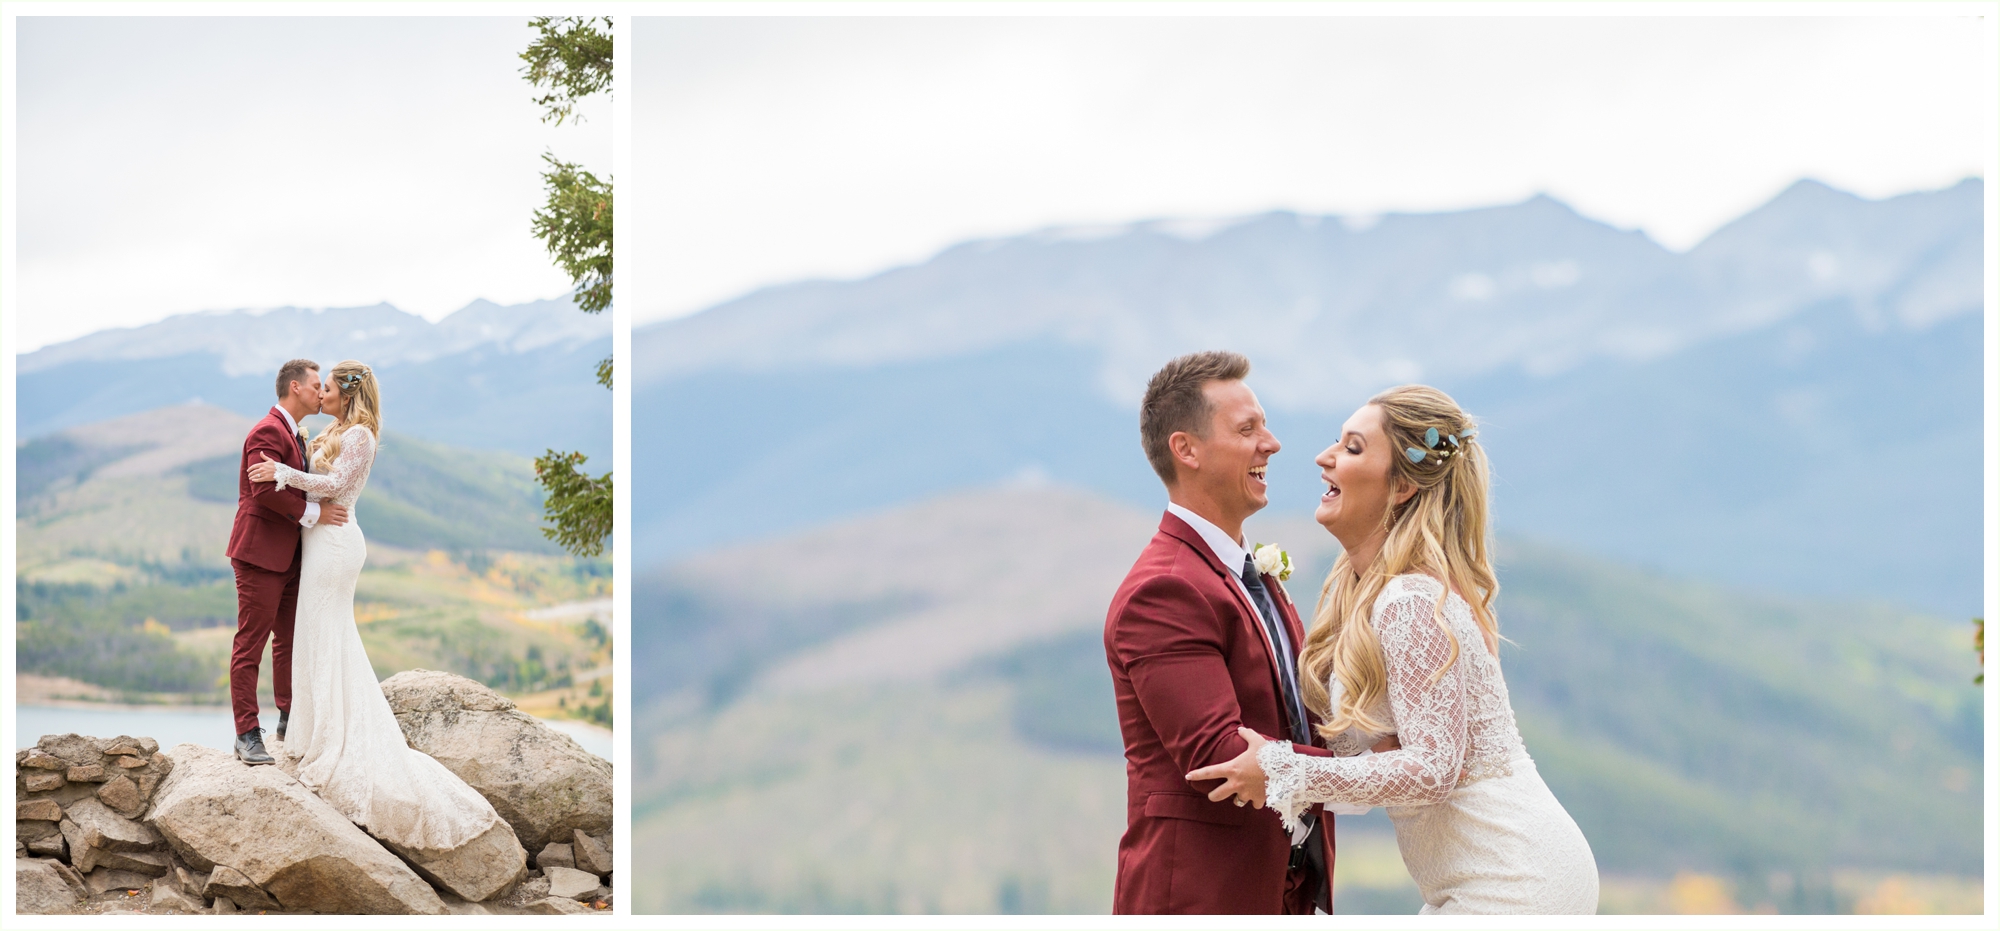 bride and groom portraits at sapphire point overlook in breckenridge colorado at lake dillon in september groom maroon suit